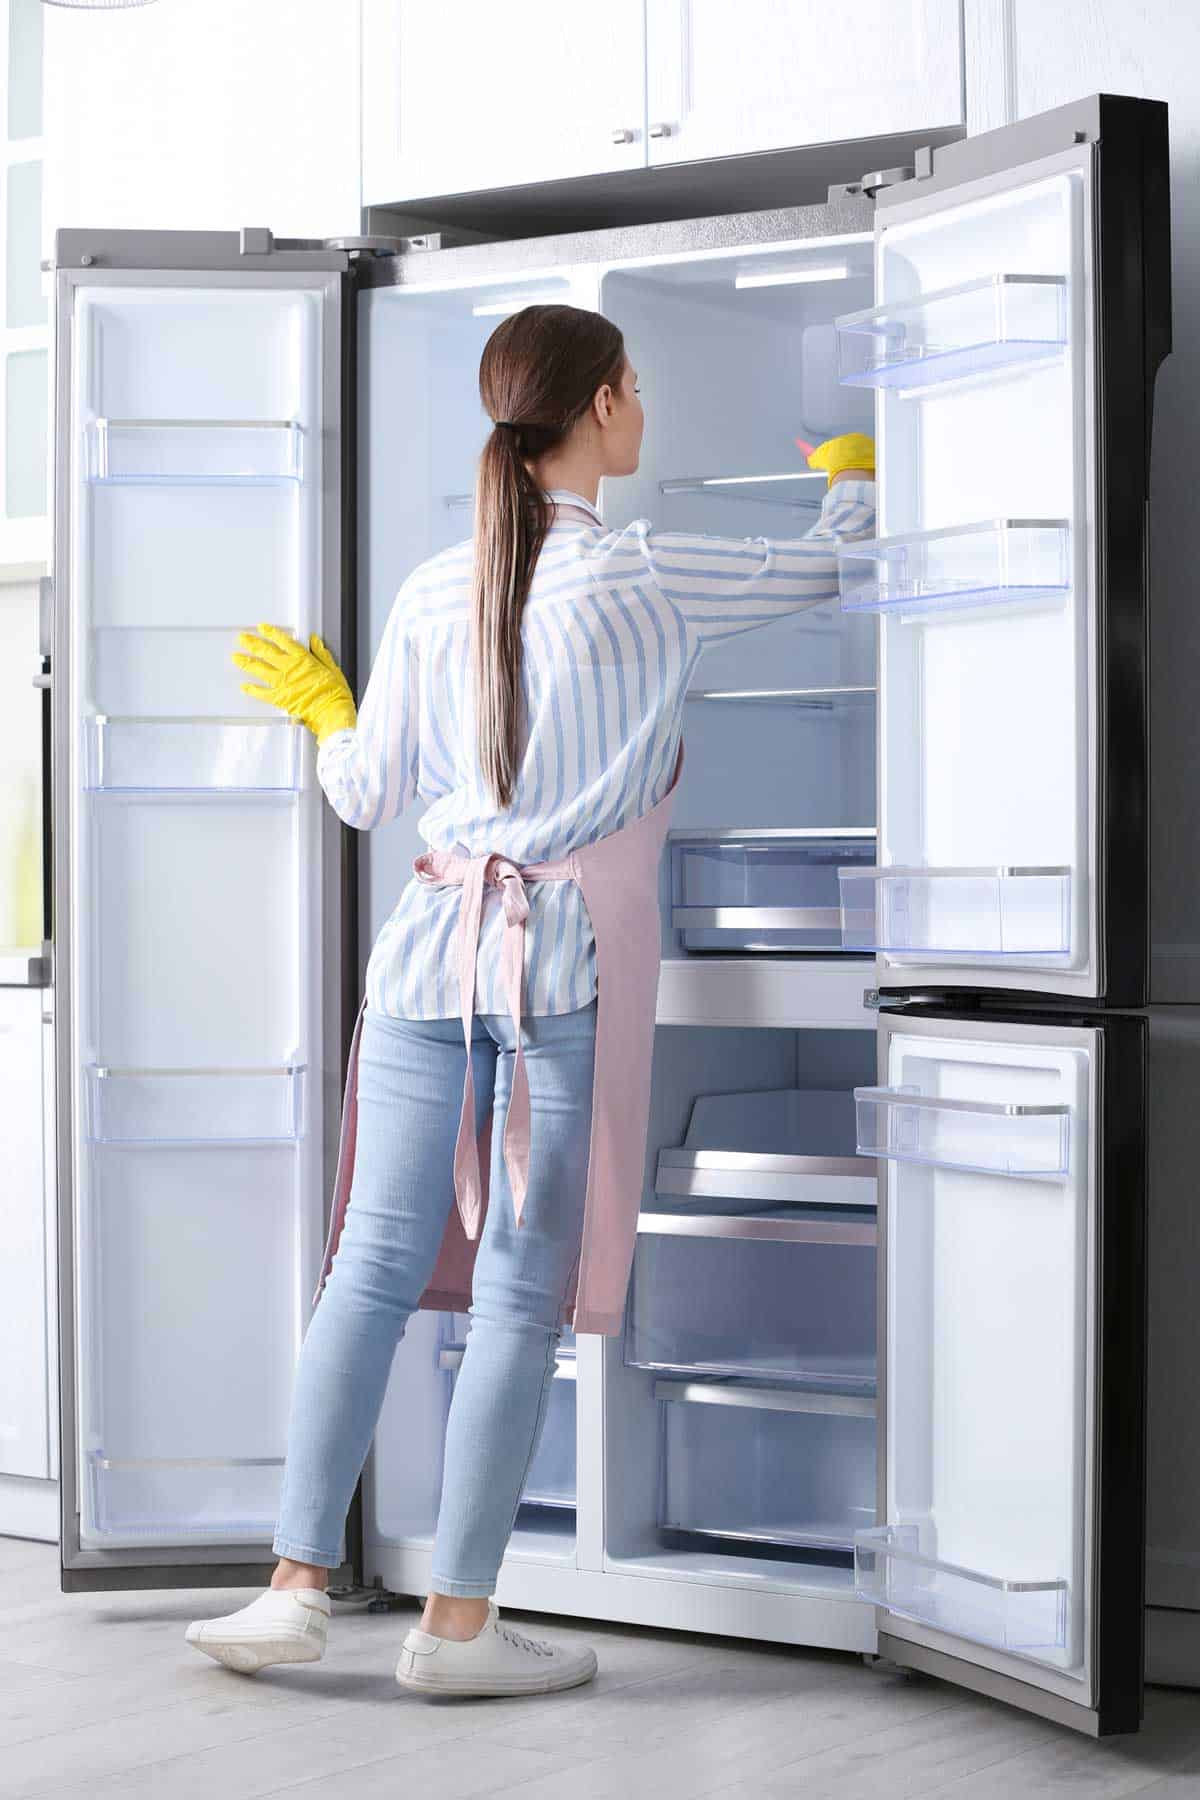 Woman cleaning a refrigerator.